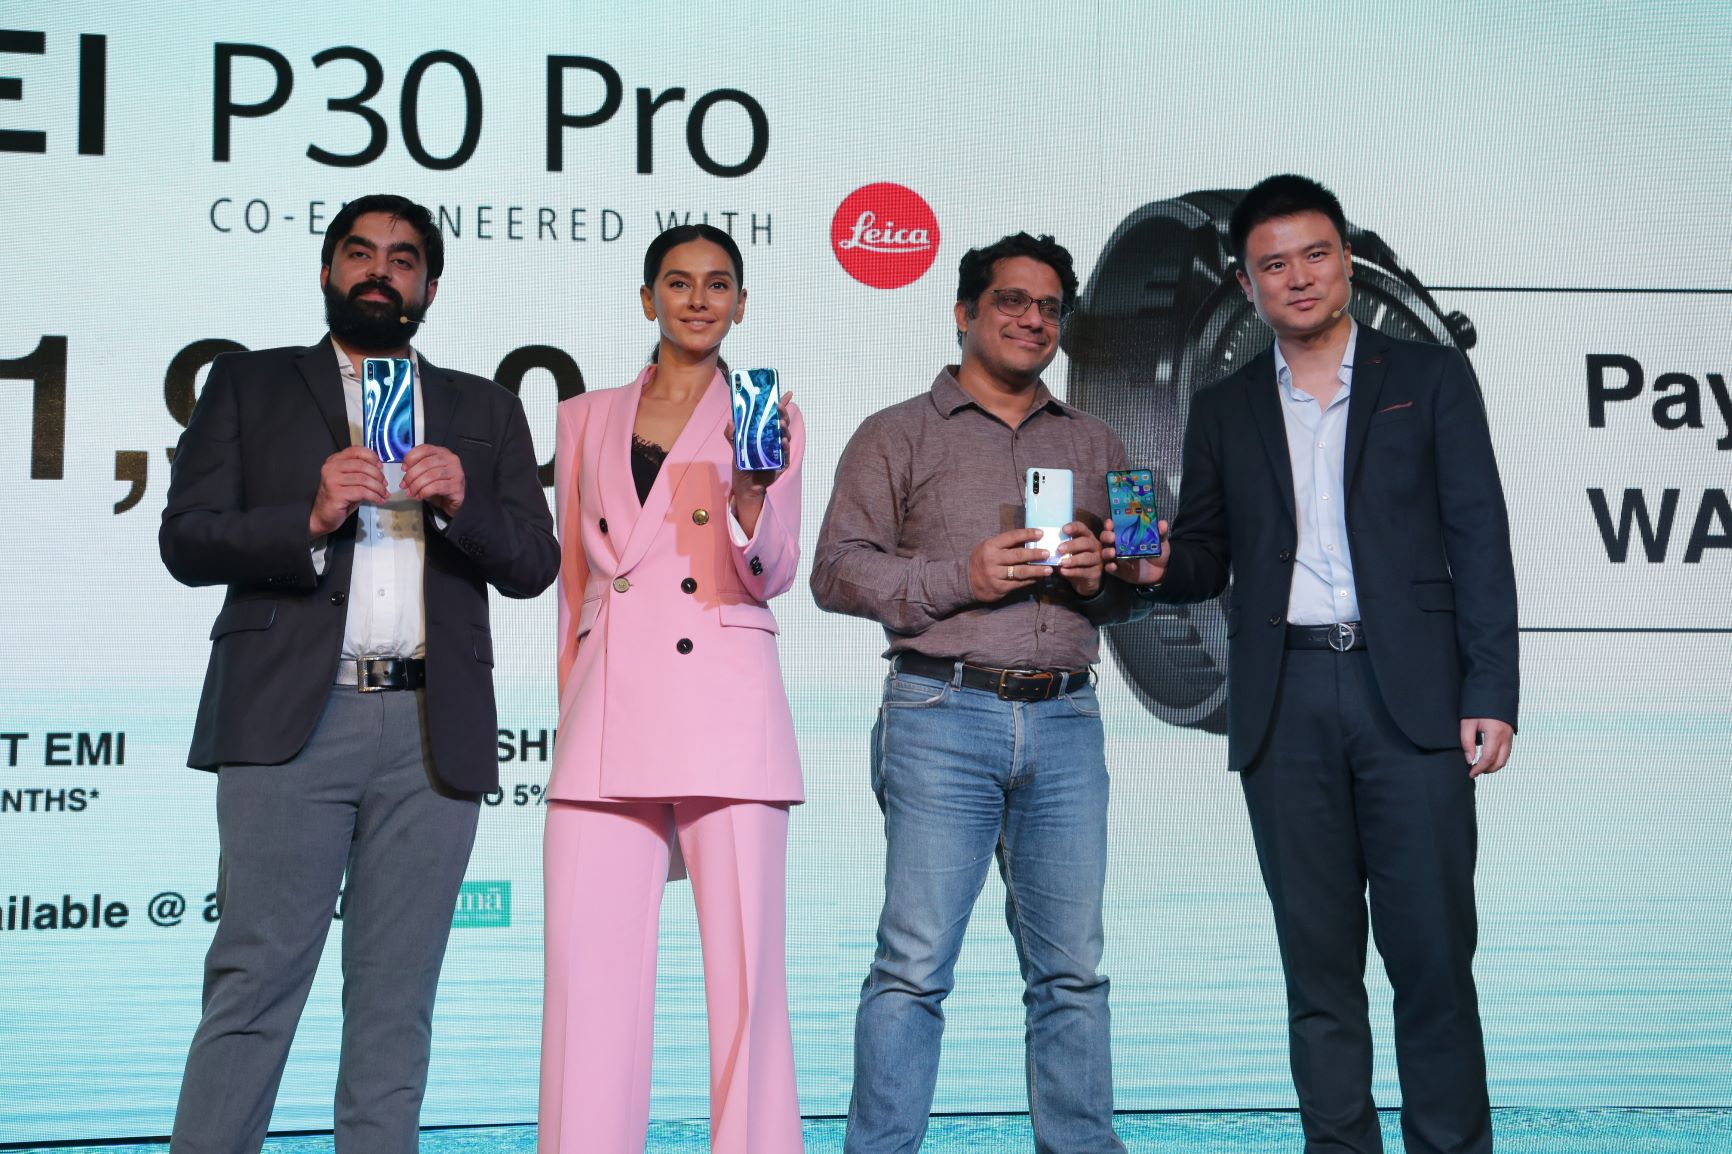 HUAWEI P30 lite with triple rear camera launched in India; Brings flagship level camera capabilities